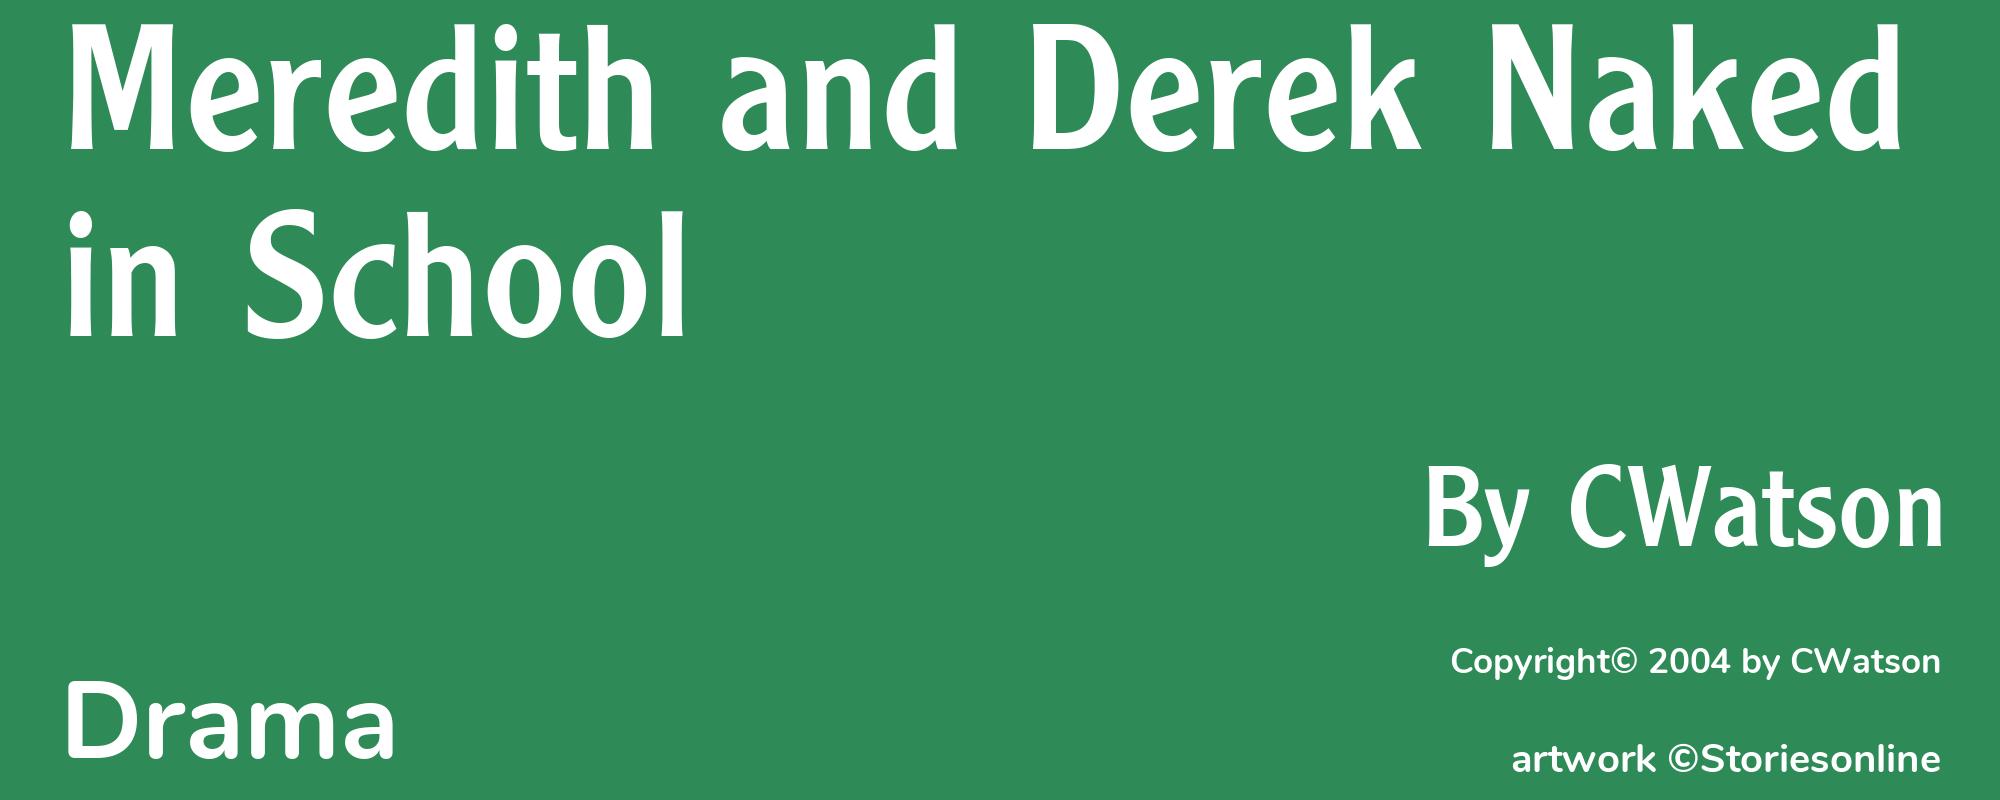 Meredith and Derek Naked in School - Cover